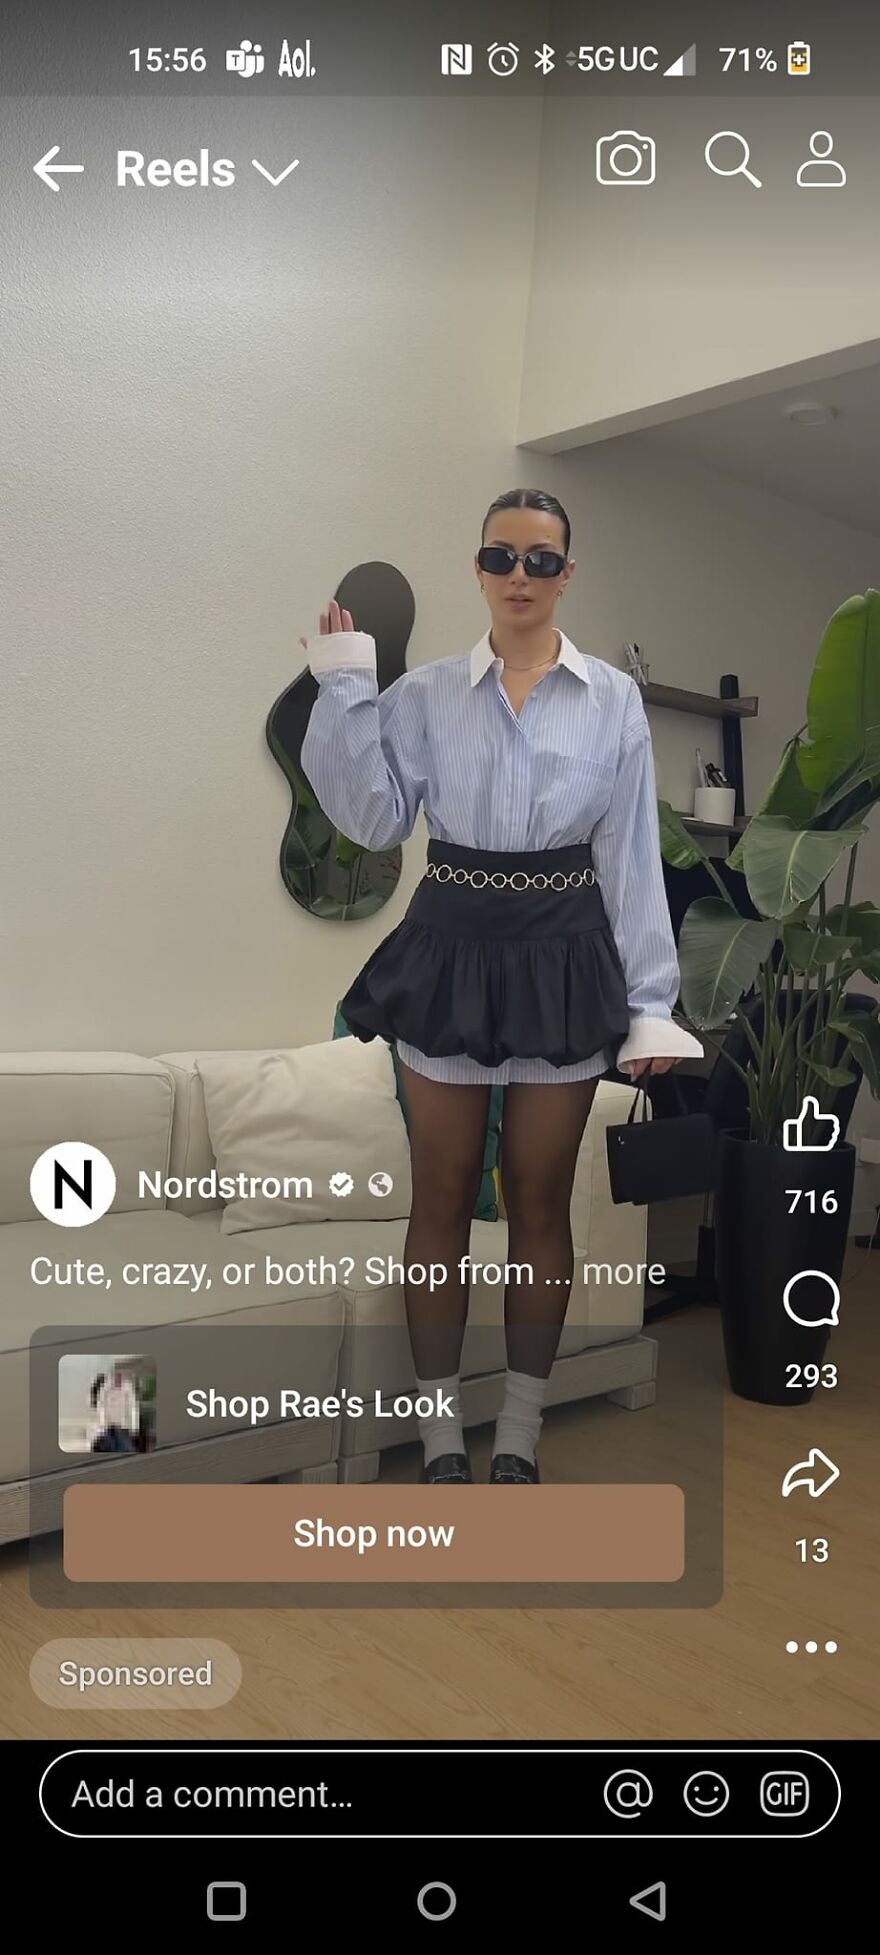 Yeah, She Planned This Whole Outfit Around Wanting Her Shirt To Show Under Her Skirt. Didn't Blur Bc It's An Ad. 🤣🫣